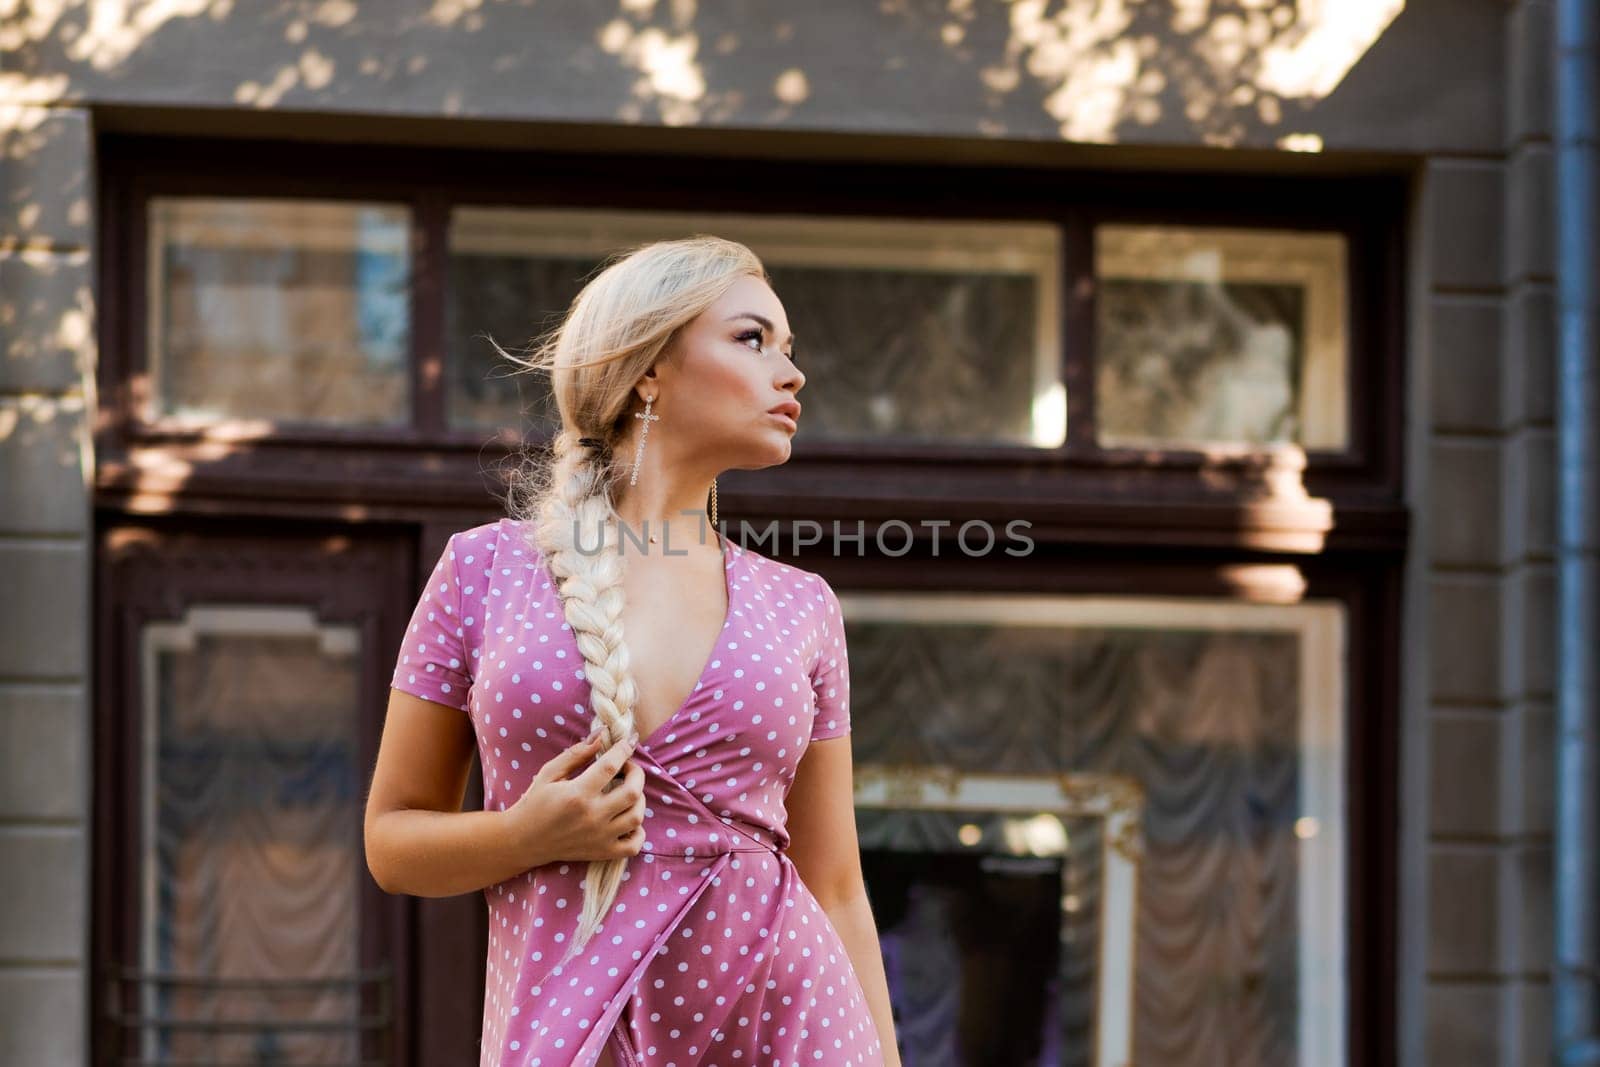 beautiful woman with long braid in pink dress with white polka dots posing on street in the city by EkaterinaPereslavtseva